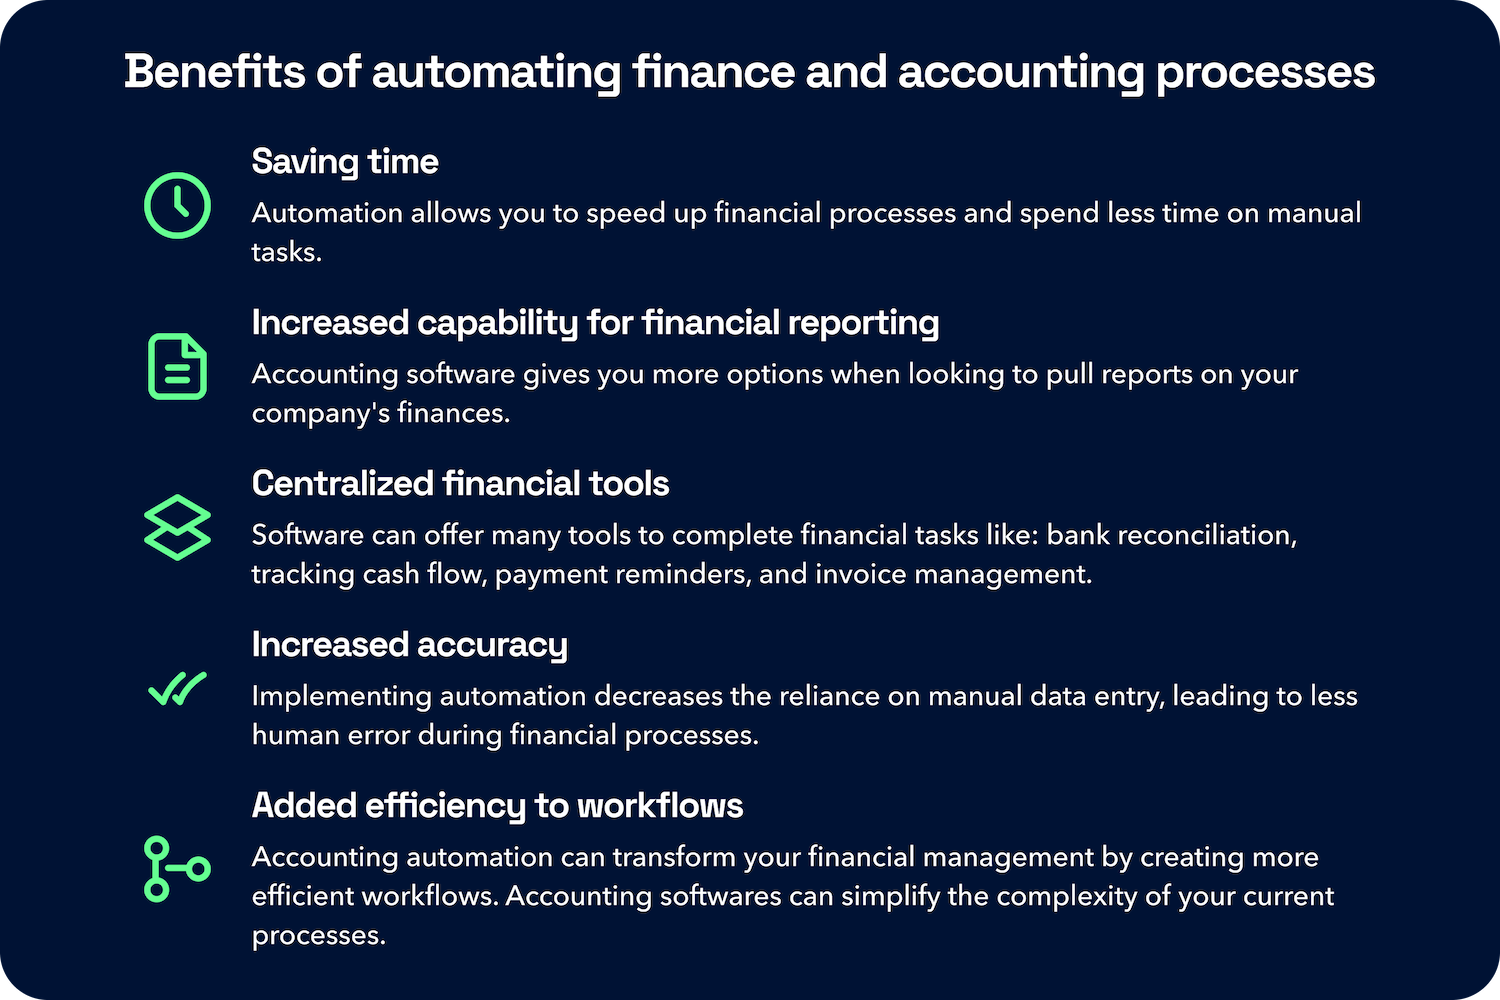 Benefits of automating finance and accounting processes